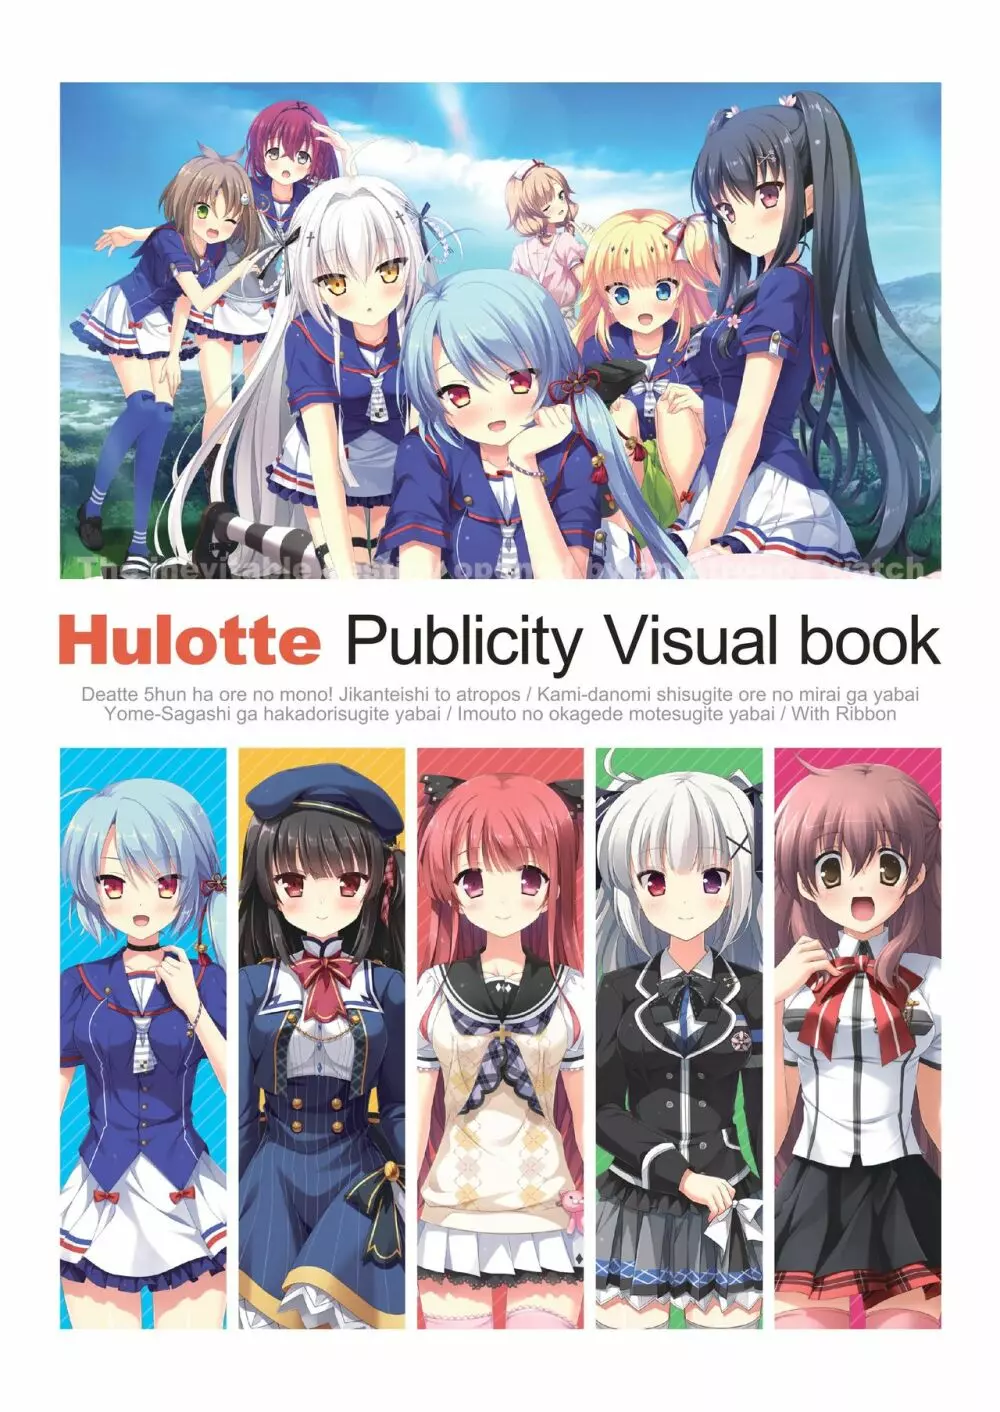 Hulotte Publicity Visual book 電子書籍版 1ページ